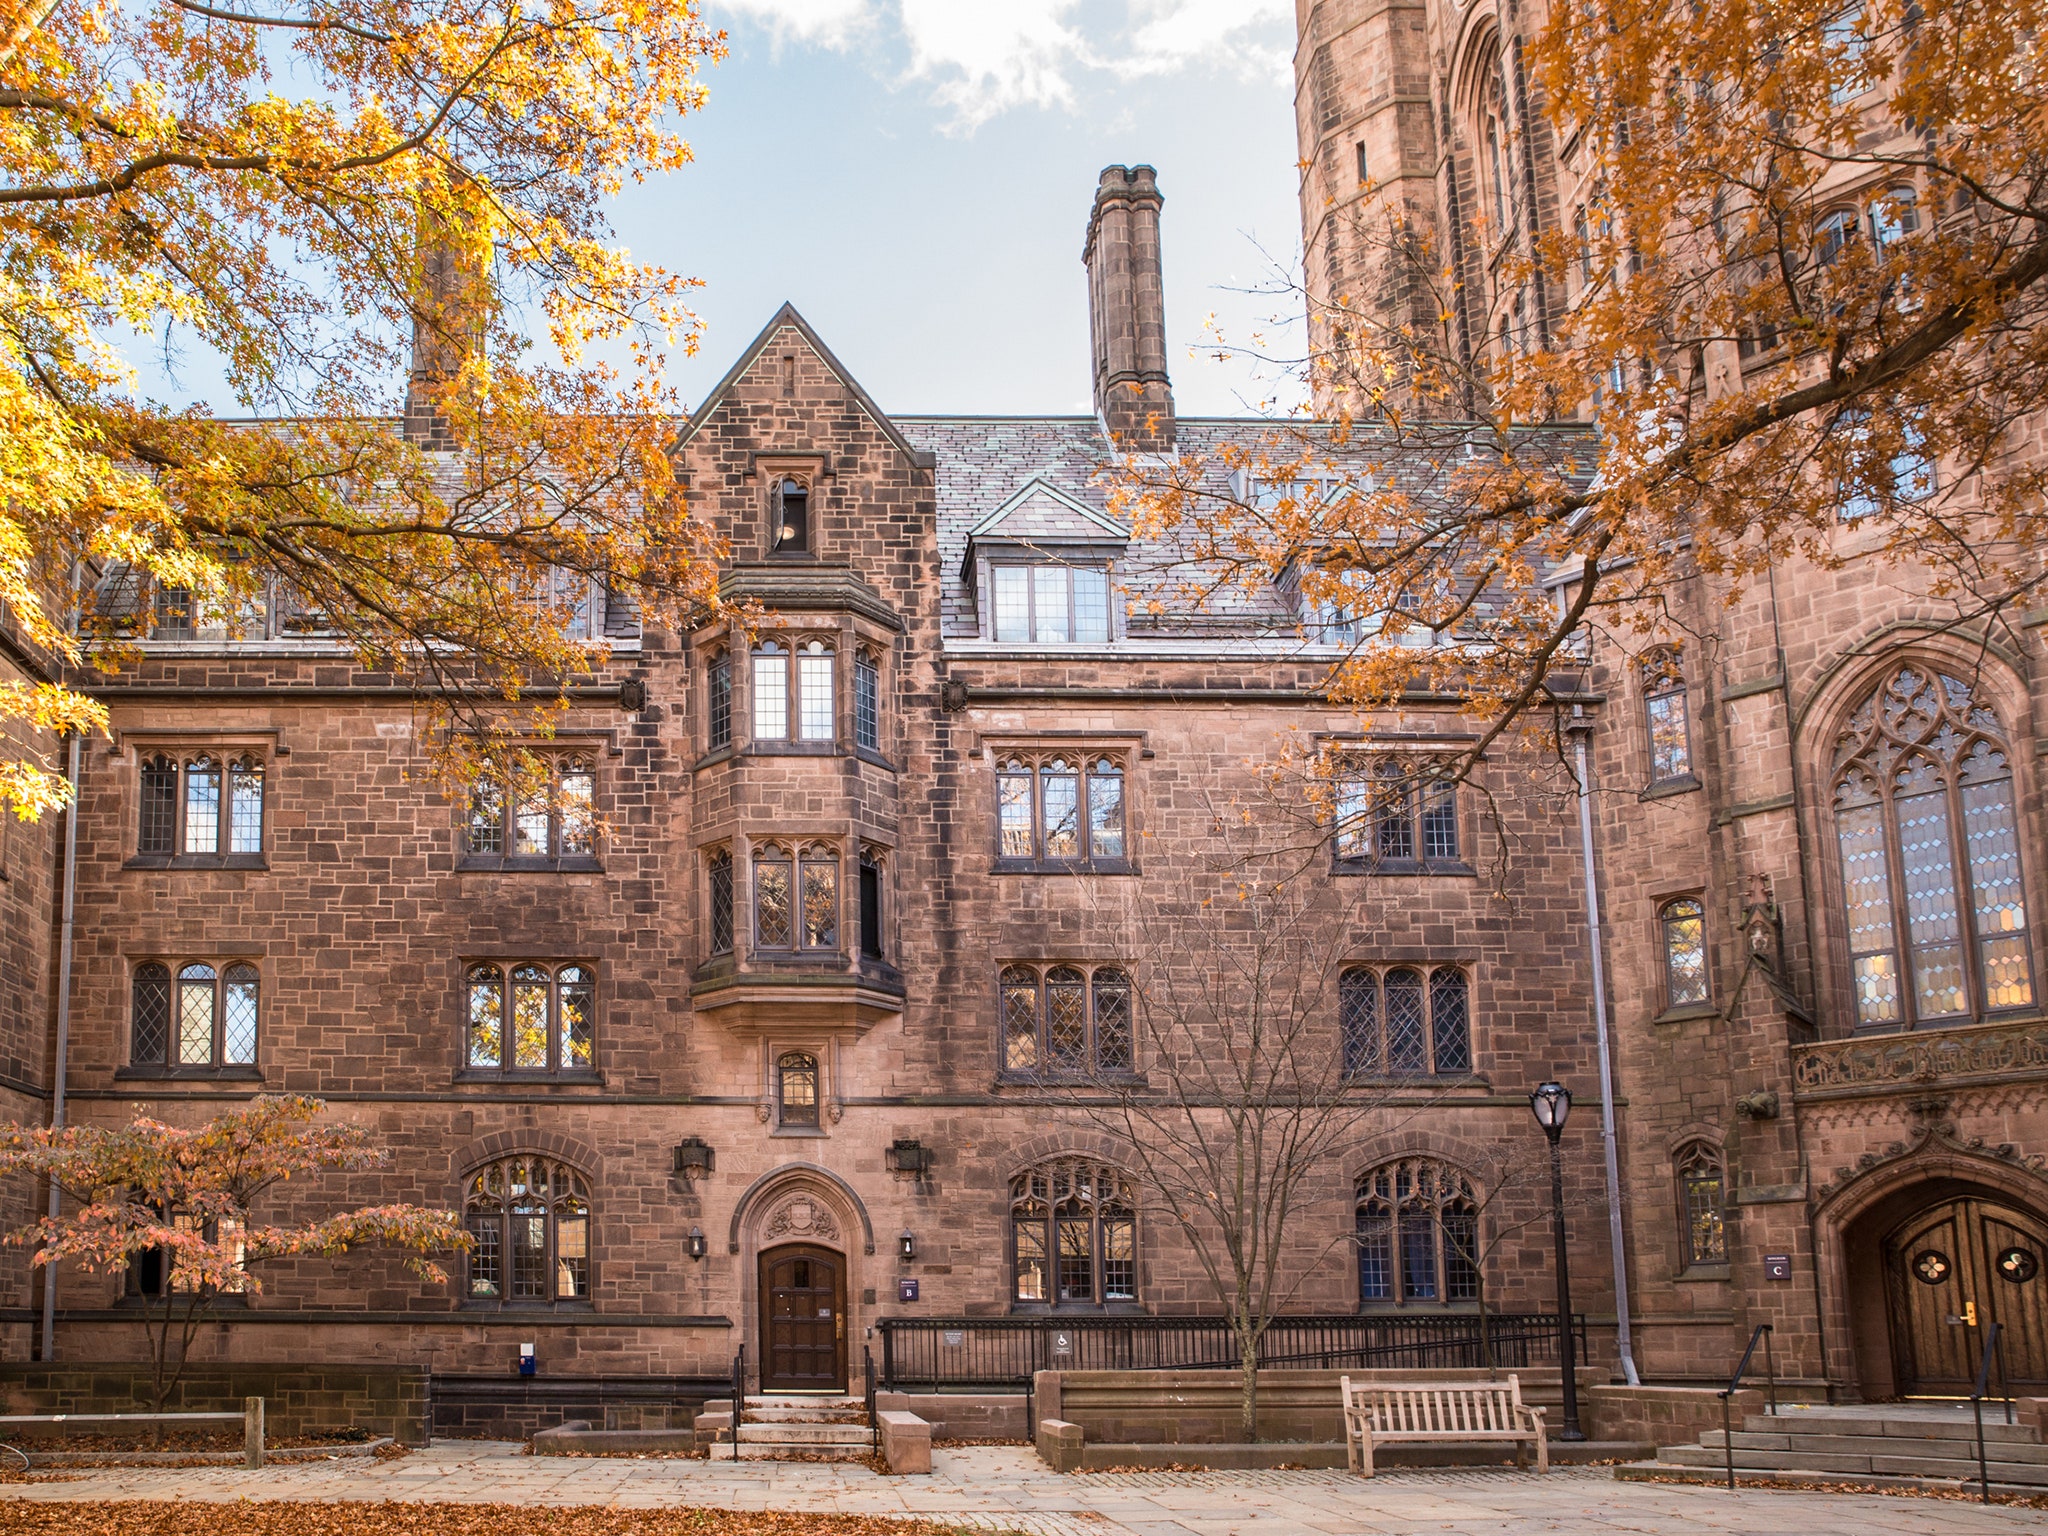 The 50 Most Beautiful College Campuses in America. Condé Nast Traveler